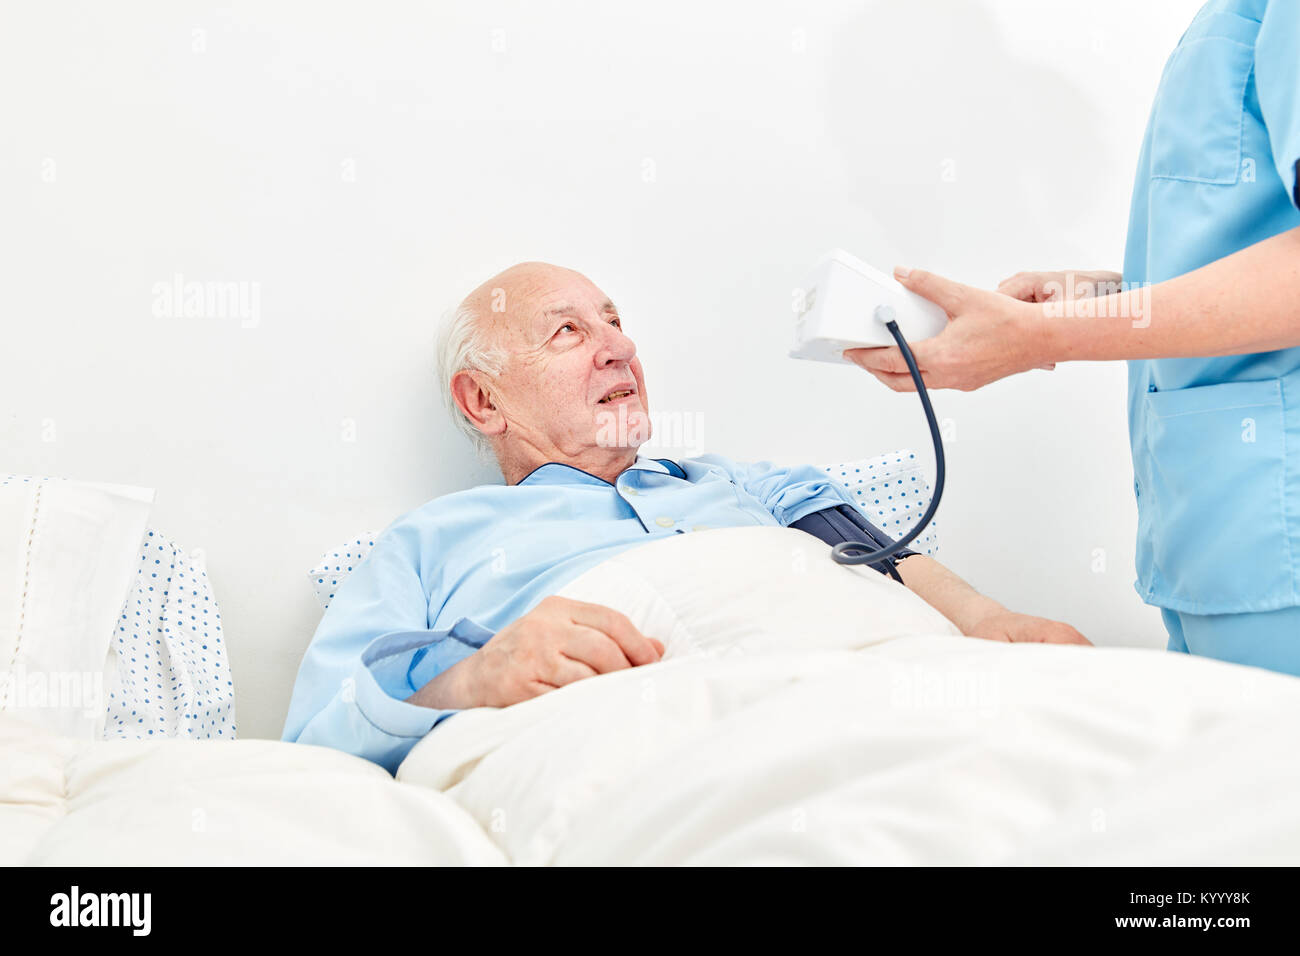 Caregiver measures the blood pressure of an old man as a patient in the hospital Stock Photo